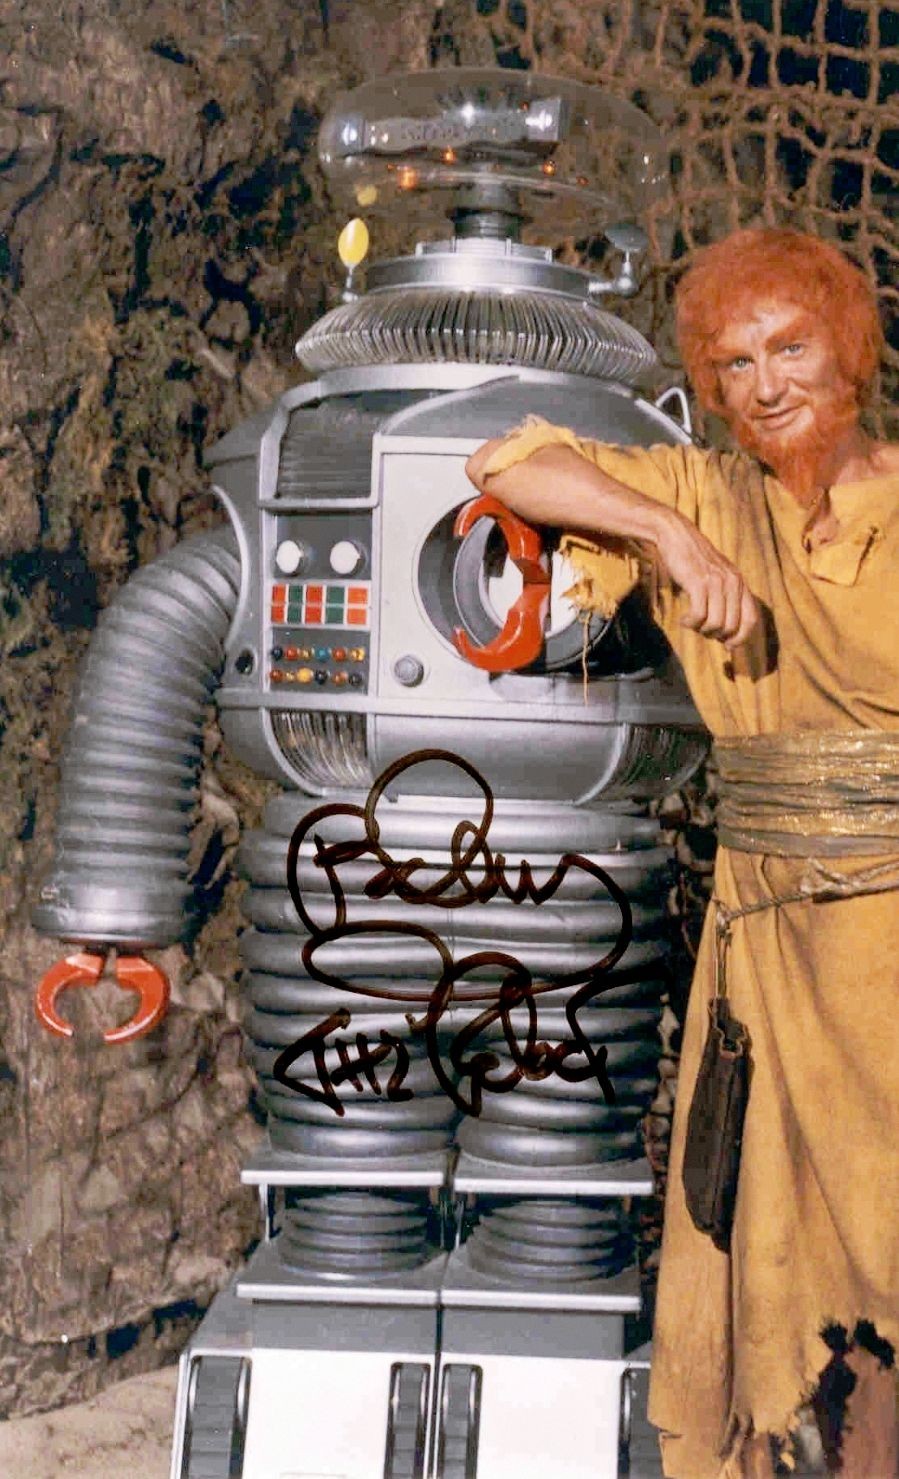 B9 ROBOT from LOST IN SPACE original vintage image cropped color & density adjusted